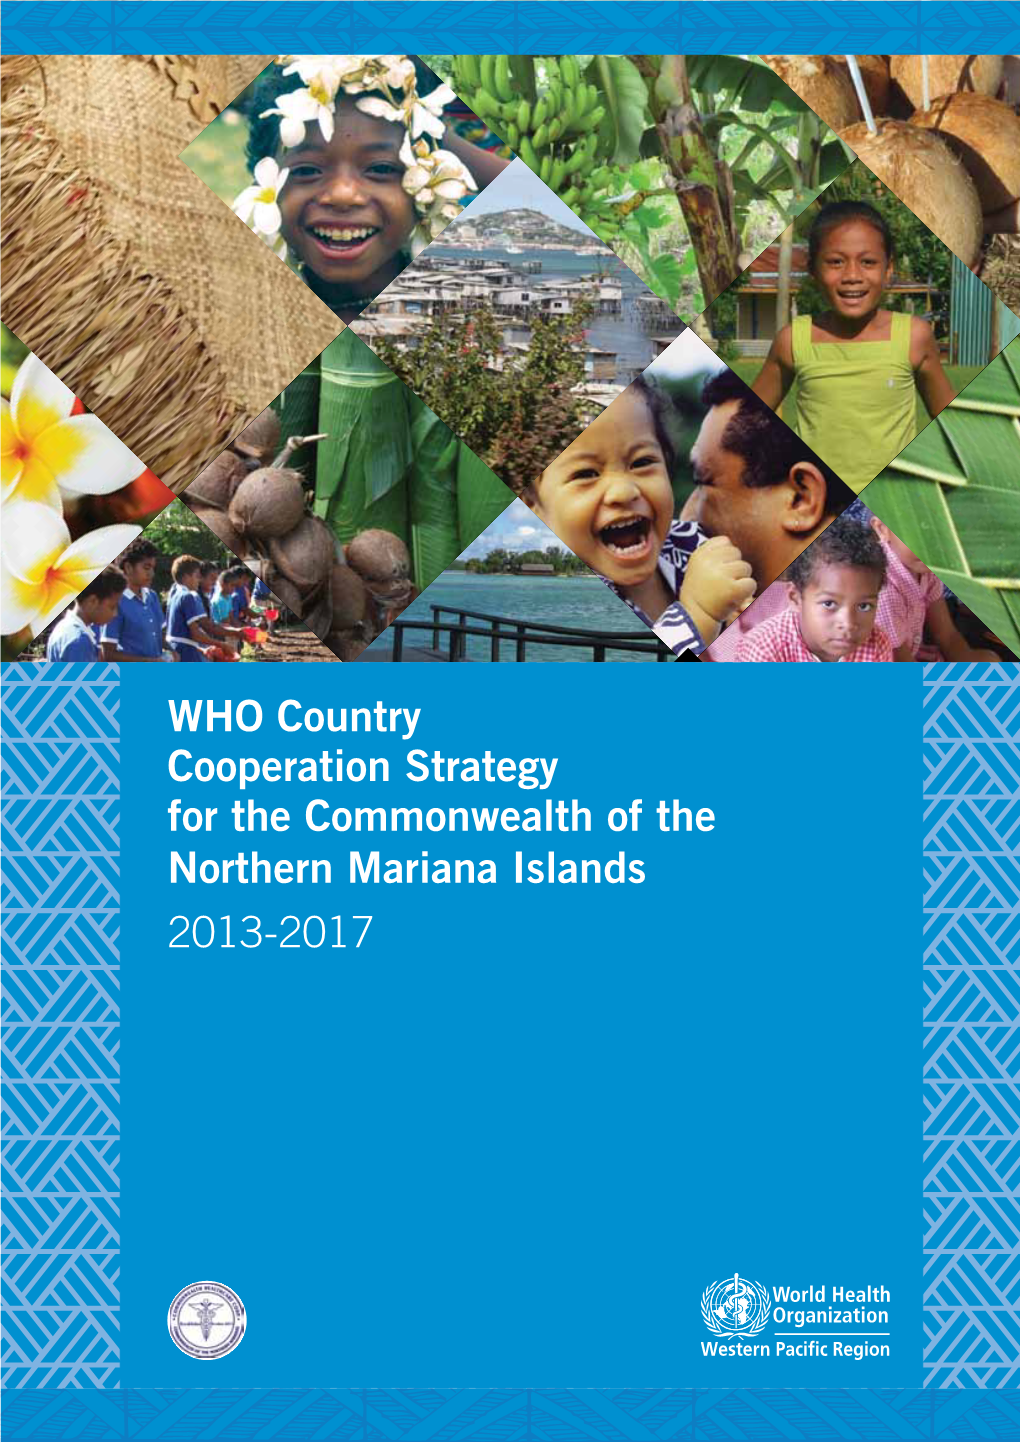 WHO Country Cooperation Strategy for the Commonwealth of the Northern Mariana Islands 2013-2017